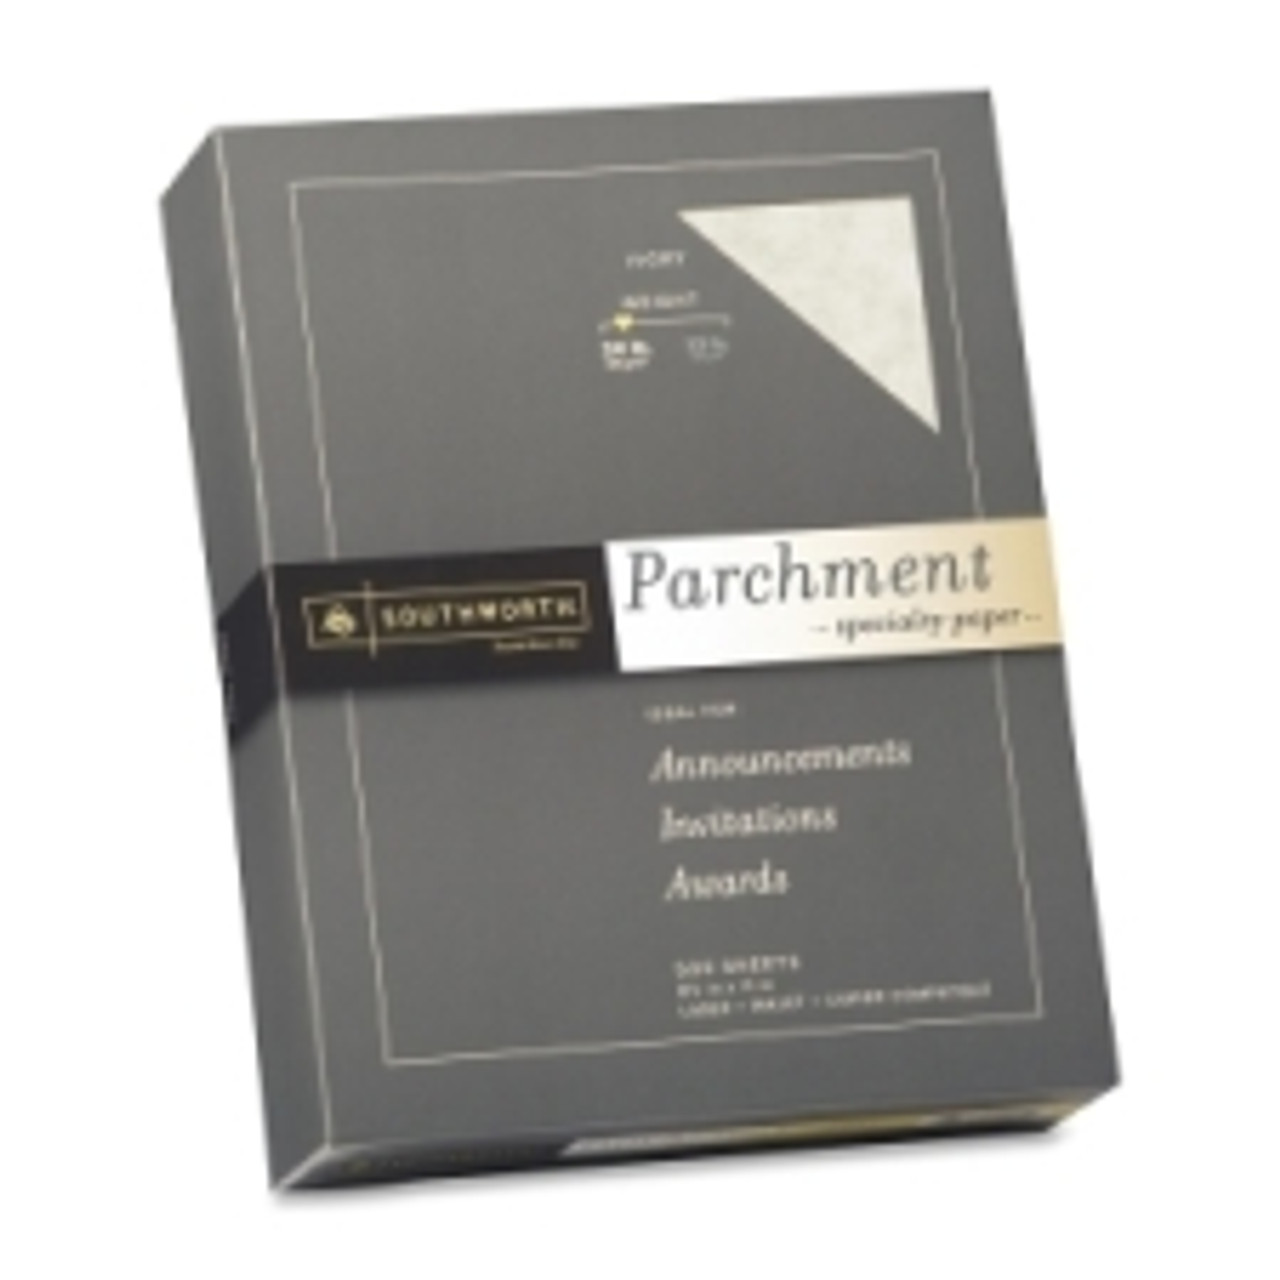 Southworth Parchment Specialty Paper, Gray - 100 count